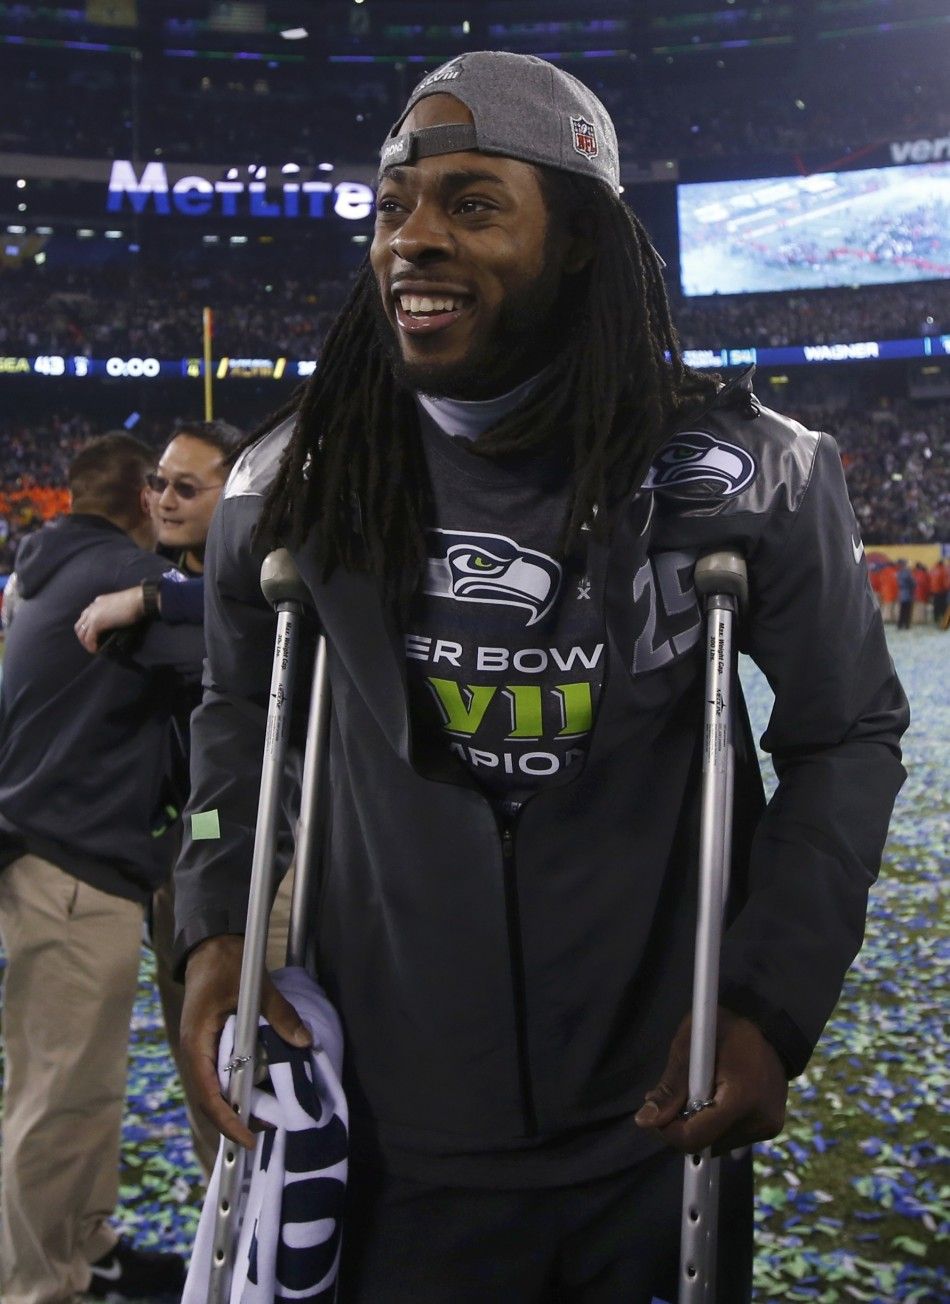 Seattle Seahawks Richard Sherman walks on crutches after the Seahawks defeated the Denver Broncos in the NFL Super Bowl XLVIII